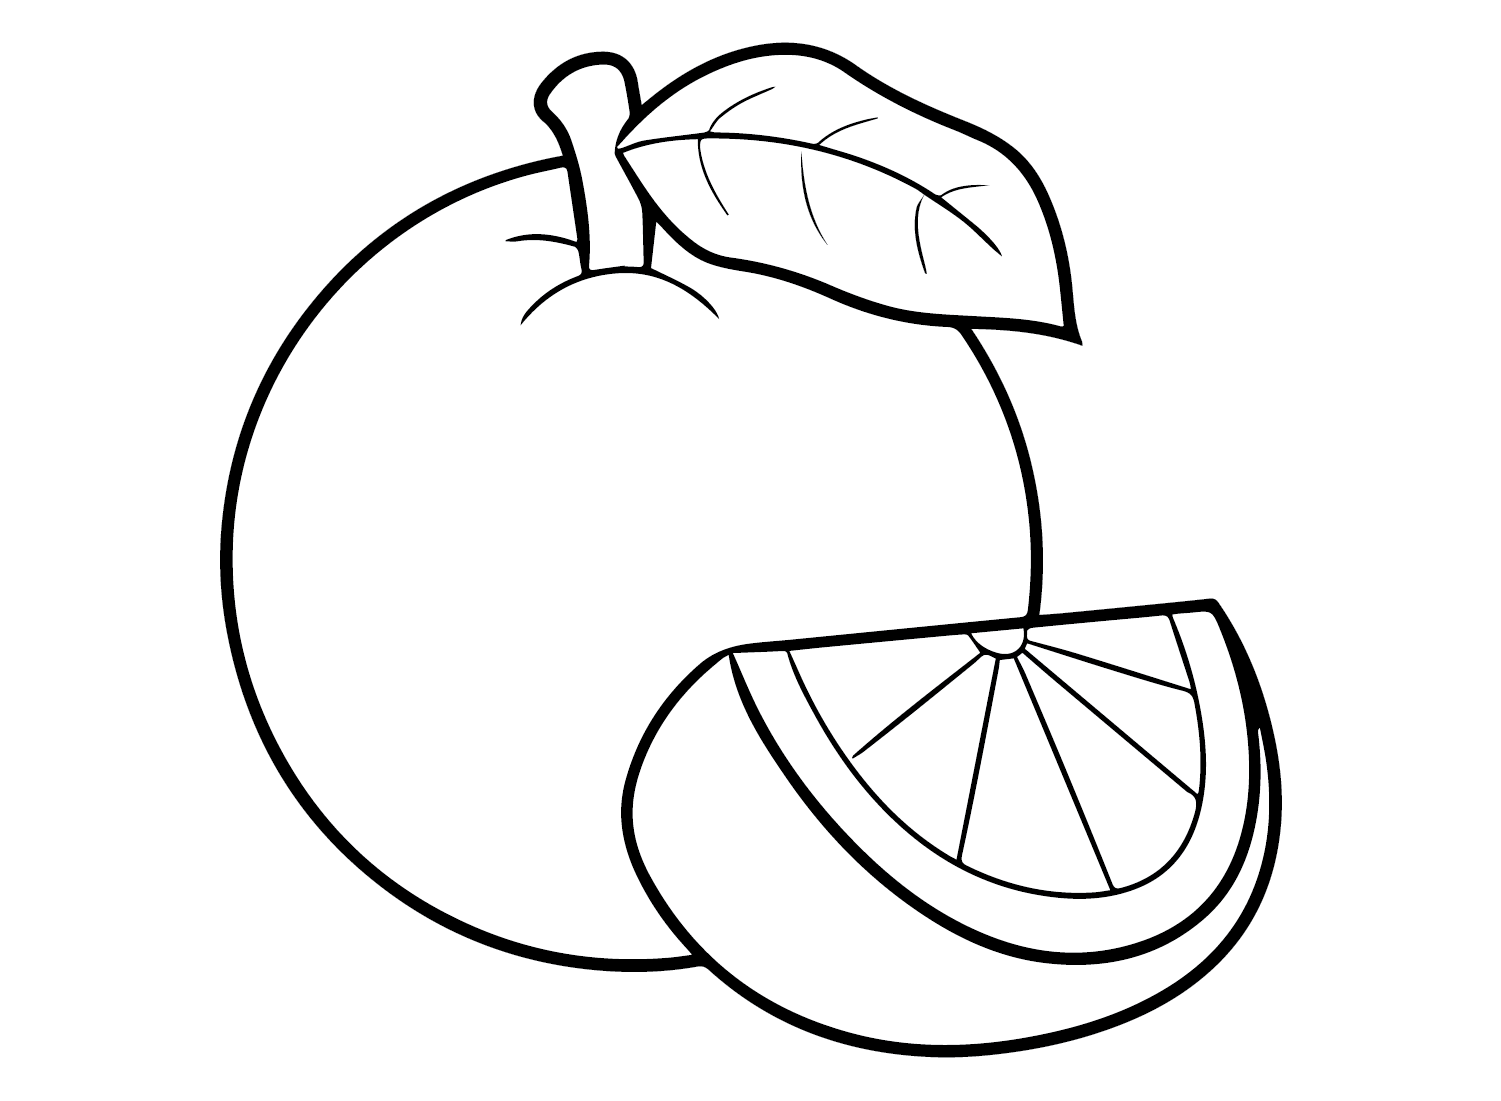 Oranges Images Coloring Page - Free Printable Coloring Pages